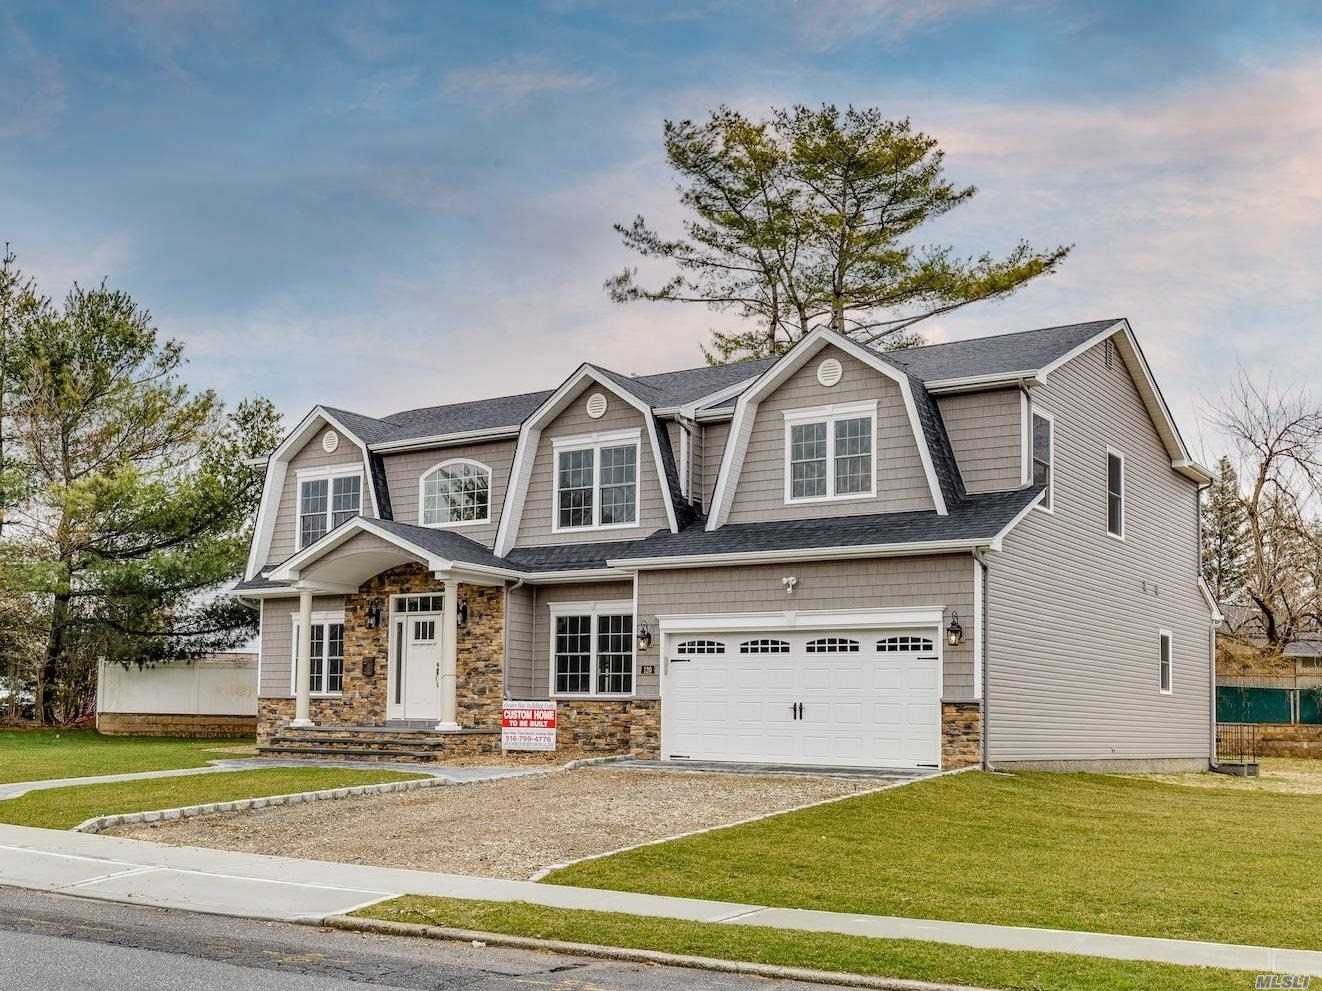 Brand New Custom Center-Hall Colonial Just Finished In Prime East Birchwood (Top-Rated Jericho Sd)! Approx 3, 800 Sf Of Open Flr Plan Designed To Perfection & Built By Bldr Of 30+Yrs/400+Homes. 9&rsquo; Bsmt W/ O-S-E, Designer Baths & Eat-In-Kitchen W/ Top-Of-Line Appliances, Walk-In Pantry, Pella Wdws, Flawless Trim-Work Hand-Crafted Throughout, 1st Flr Jr Suite &/Or Office W/ Own Private F-Bath + Add&rsquo;l H-Bath/Powder Rm On 1st Flr, Mstr Ste W/2 W-I-C&rsquo;s & Fbath+Jcuzzi, & Much More! No Expenses Spared!